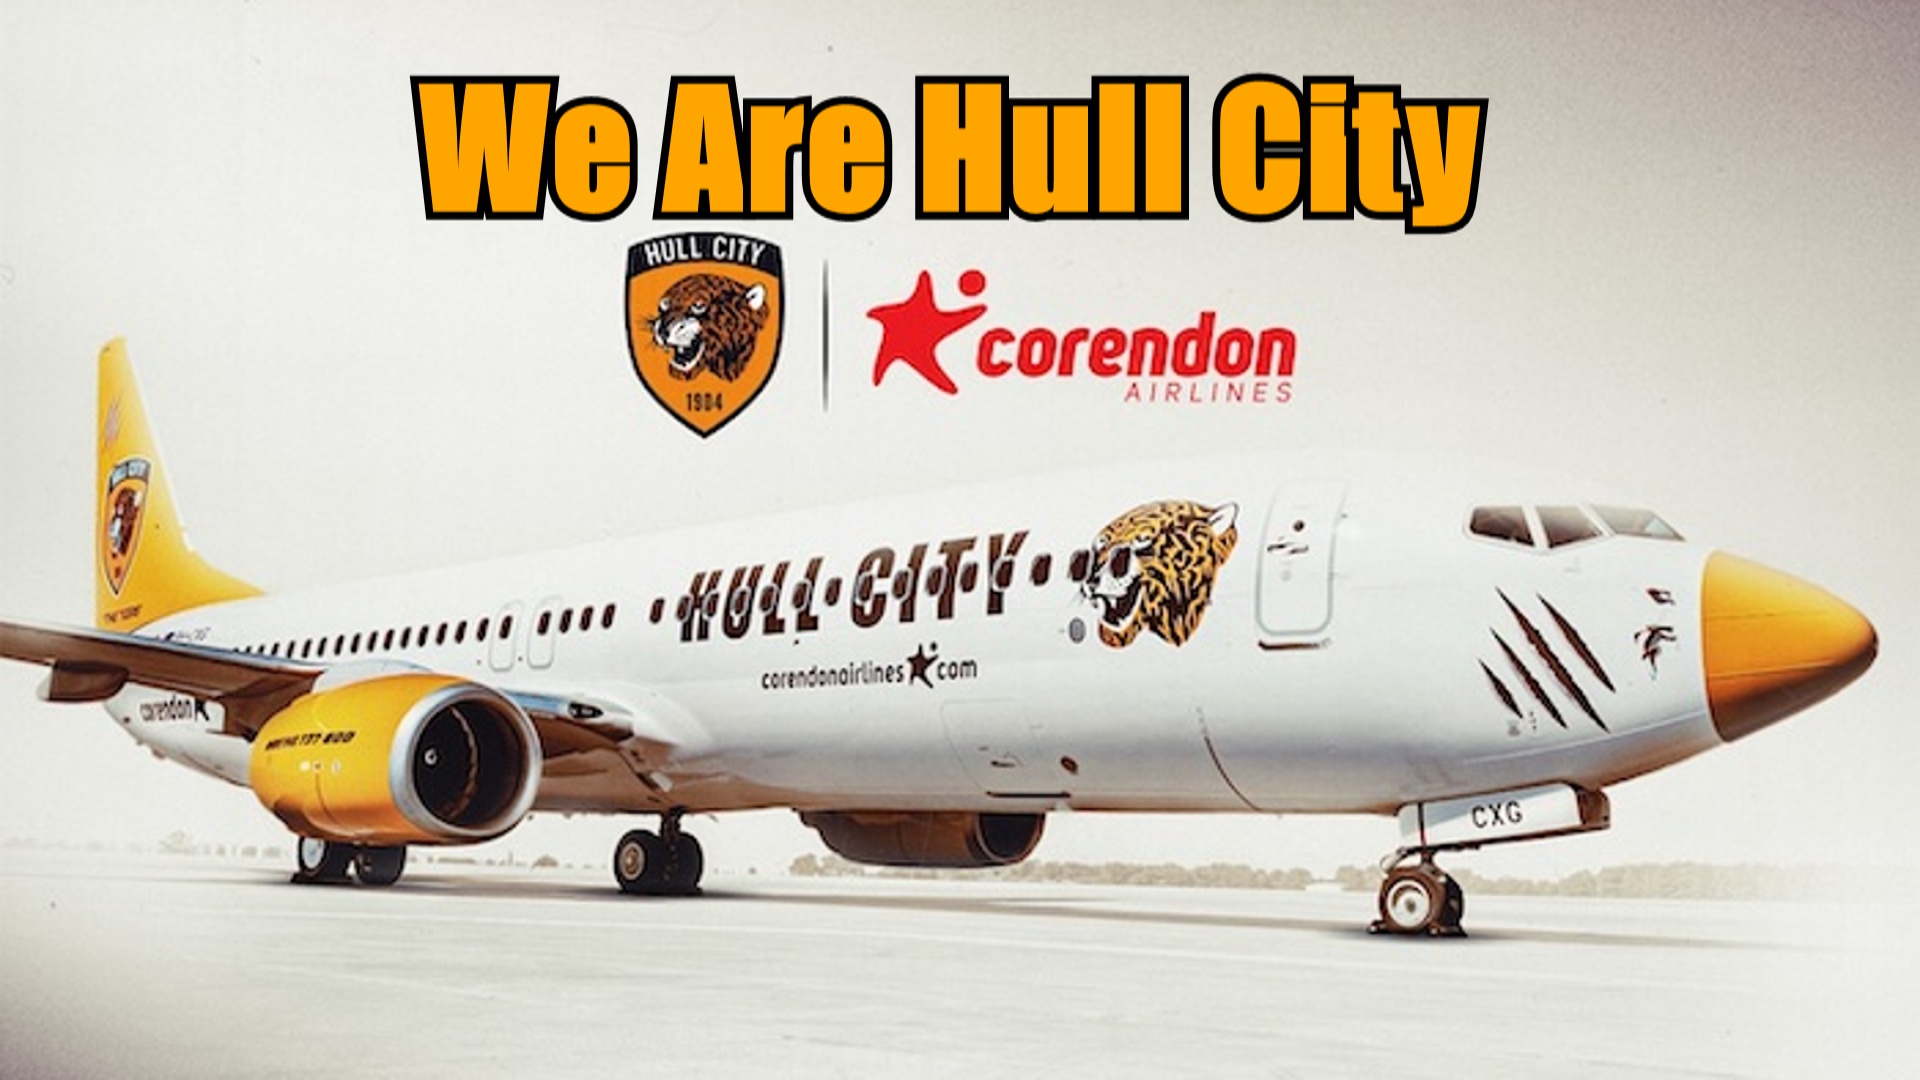 We Are Hull City x Corendon Airlines